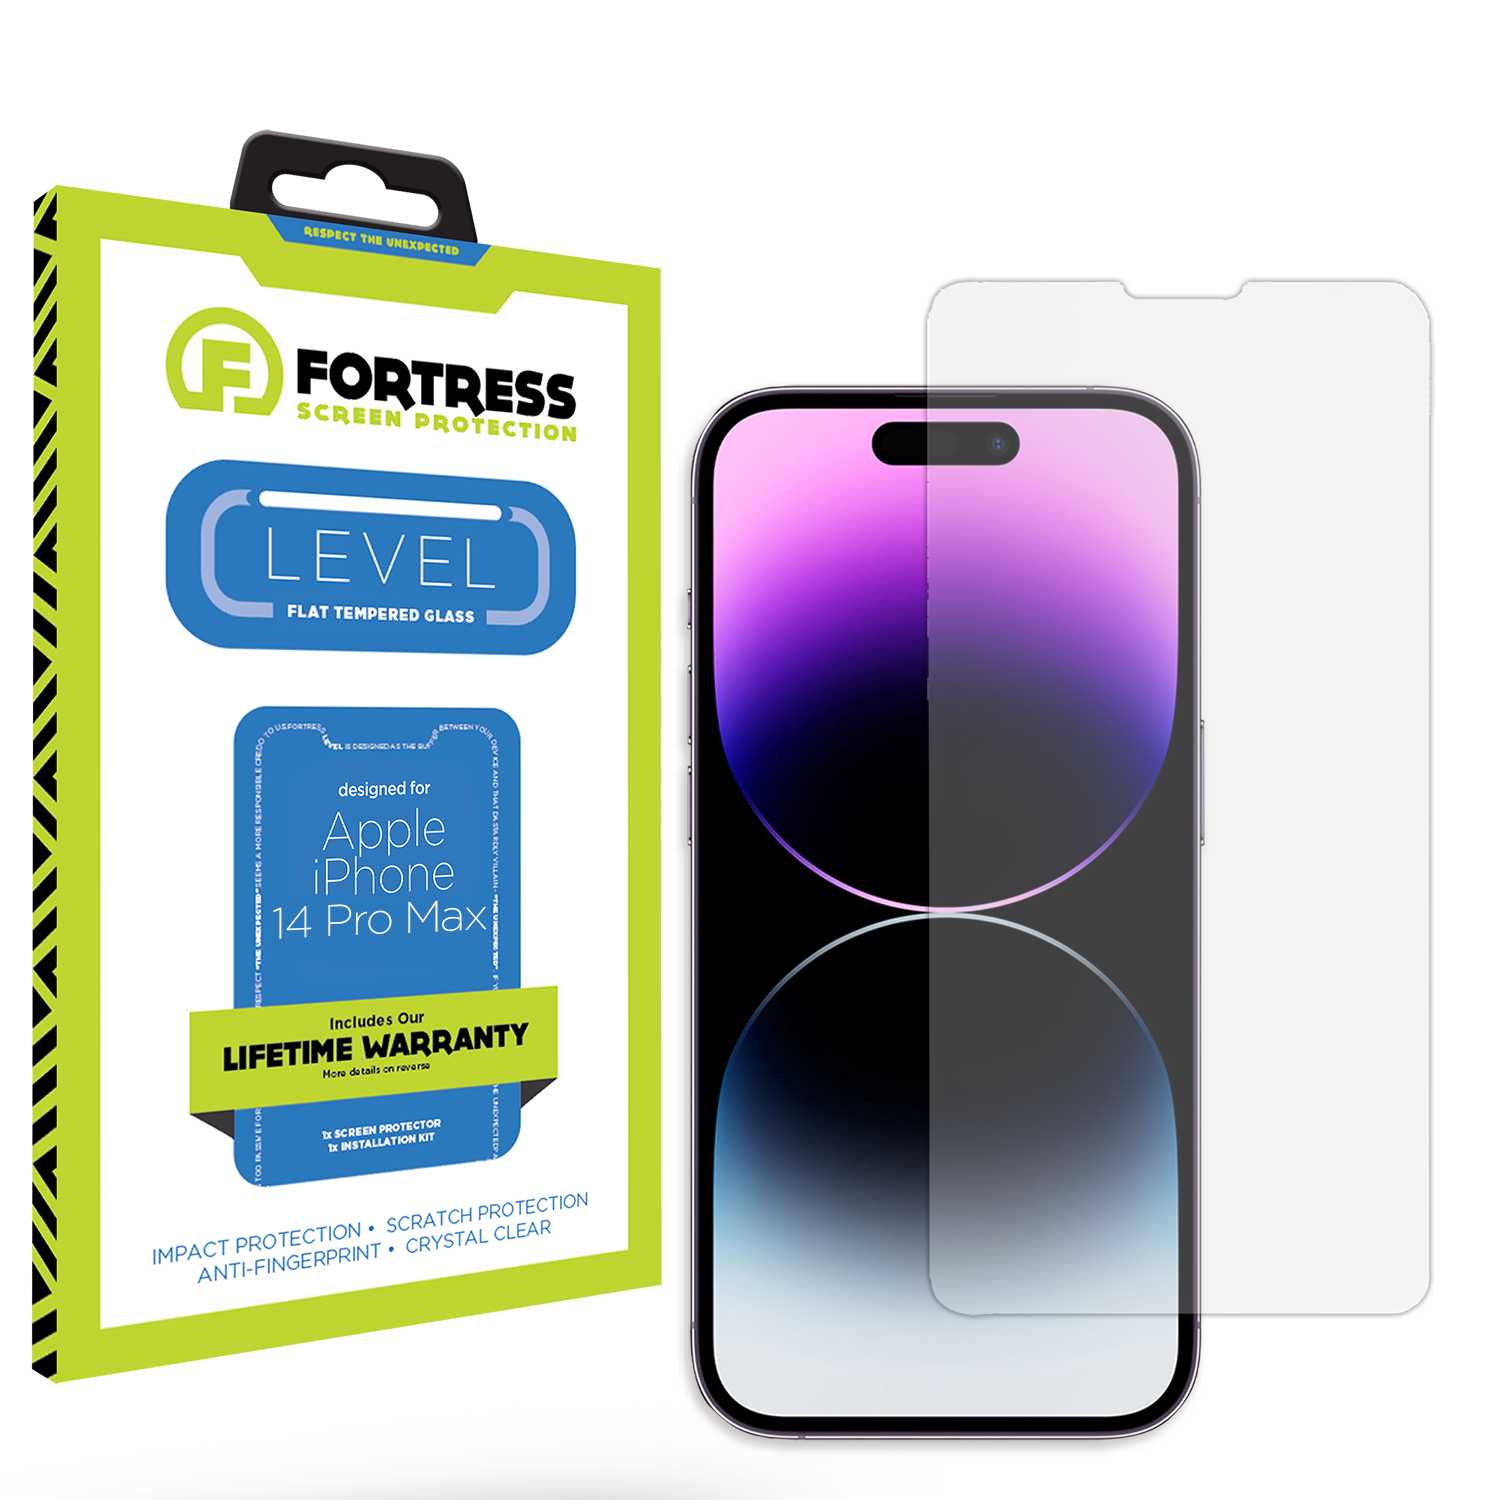 Fortress iPhone 14 Pro Max Screen Protector $0Coverage Scooch Screen Protector